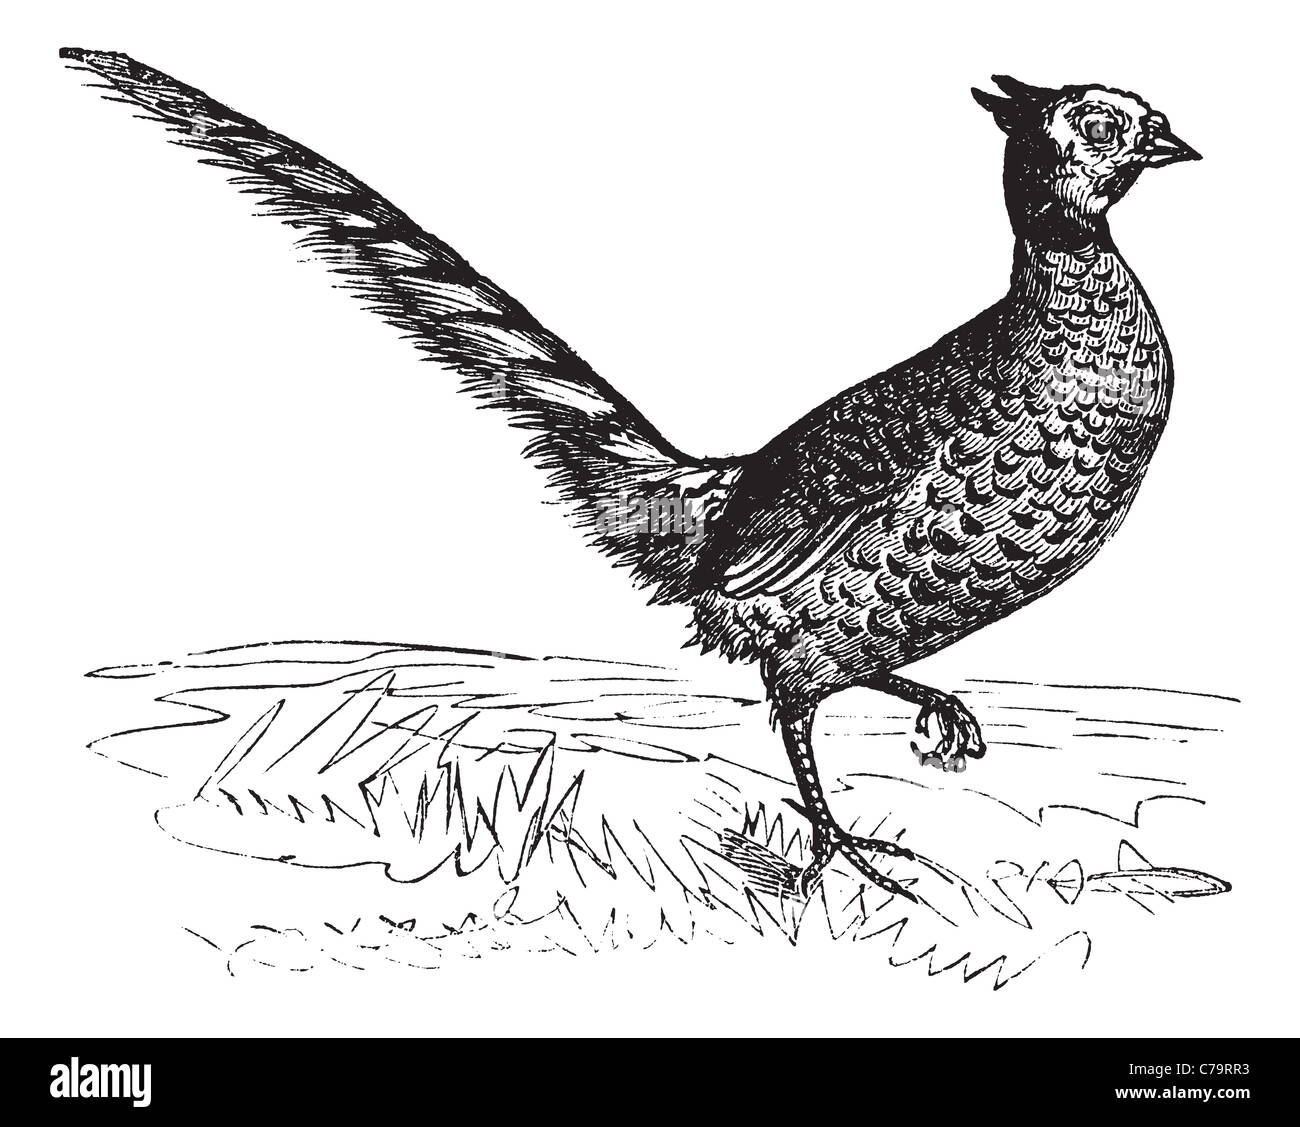 Common Pheasant or Phasianus colchicus, vintage engraving. Old engraved illustration of a Common Pheasant. Stock Photo